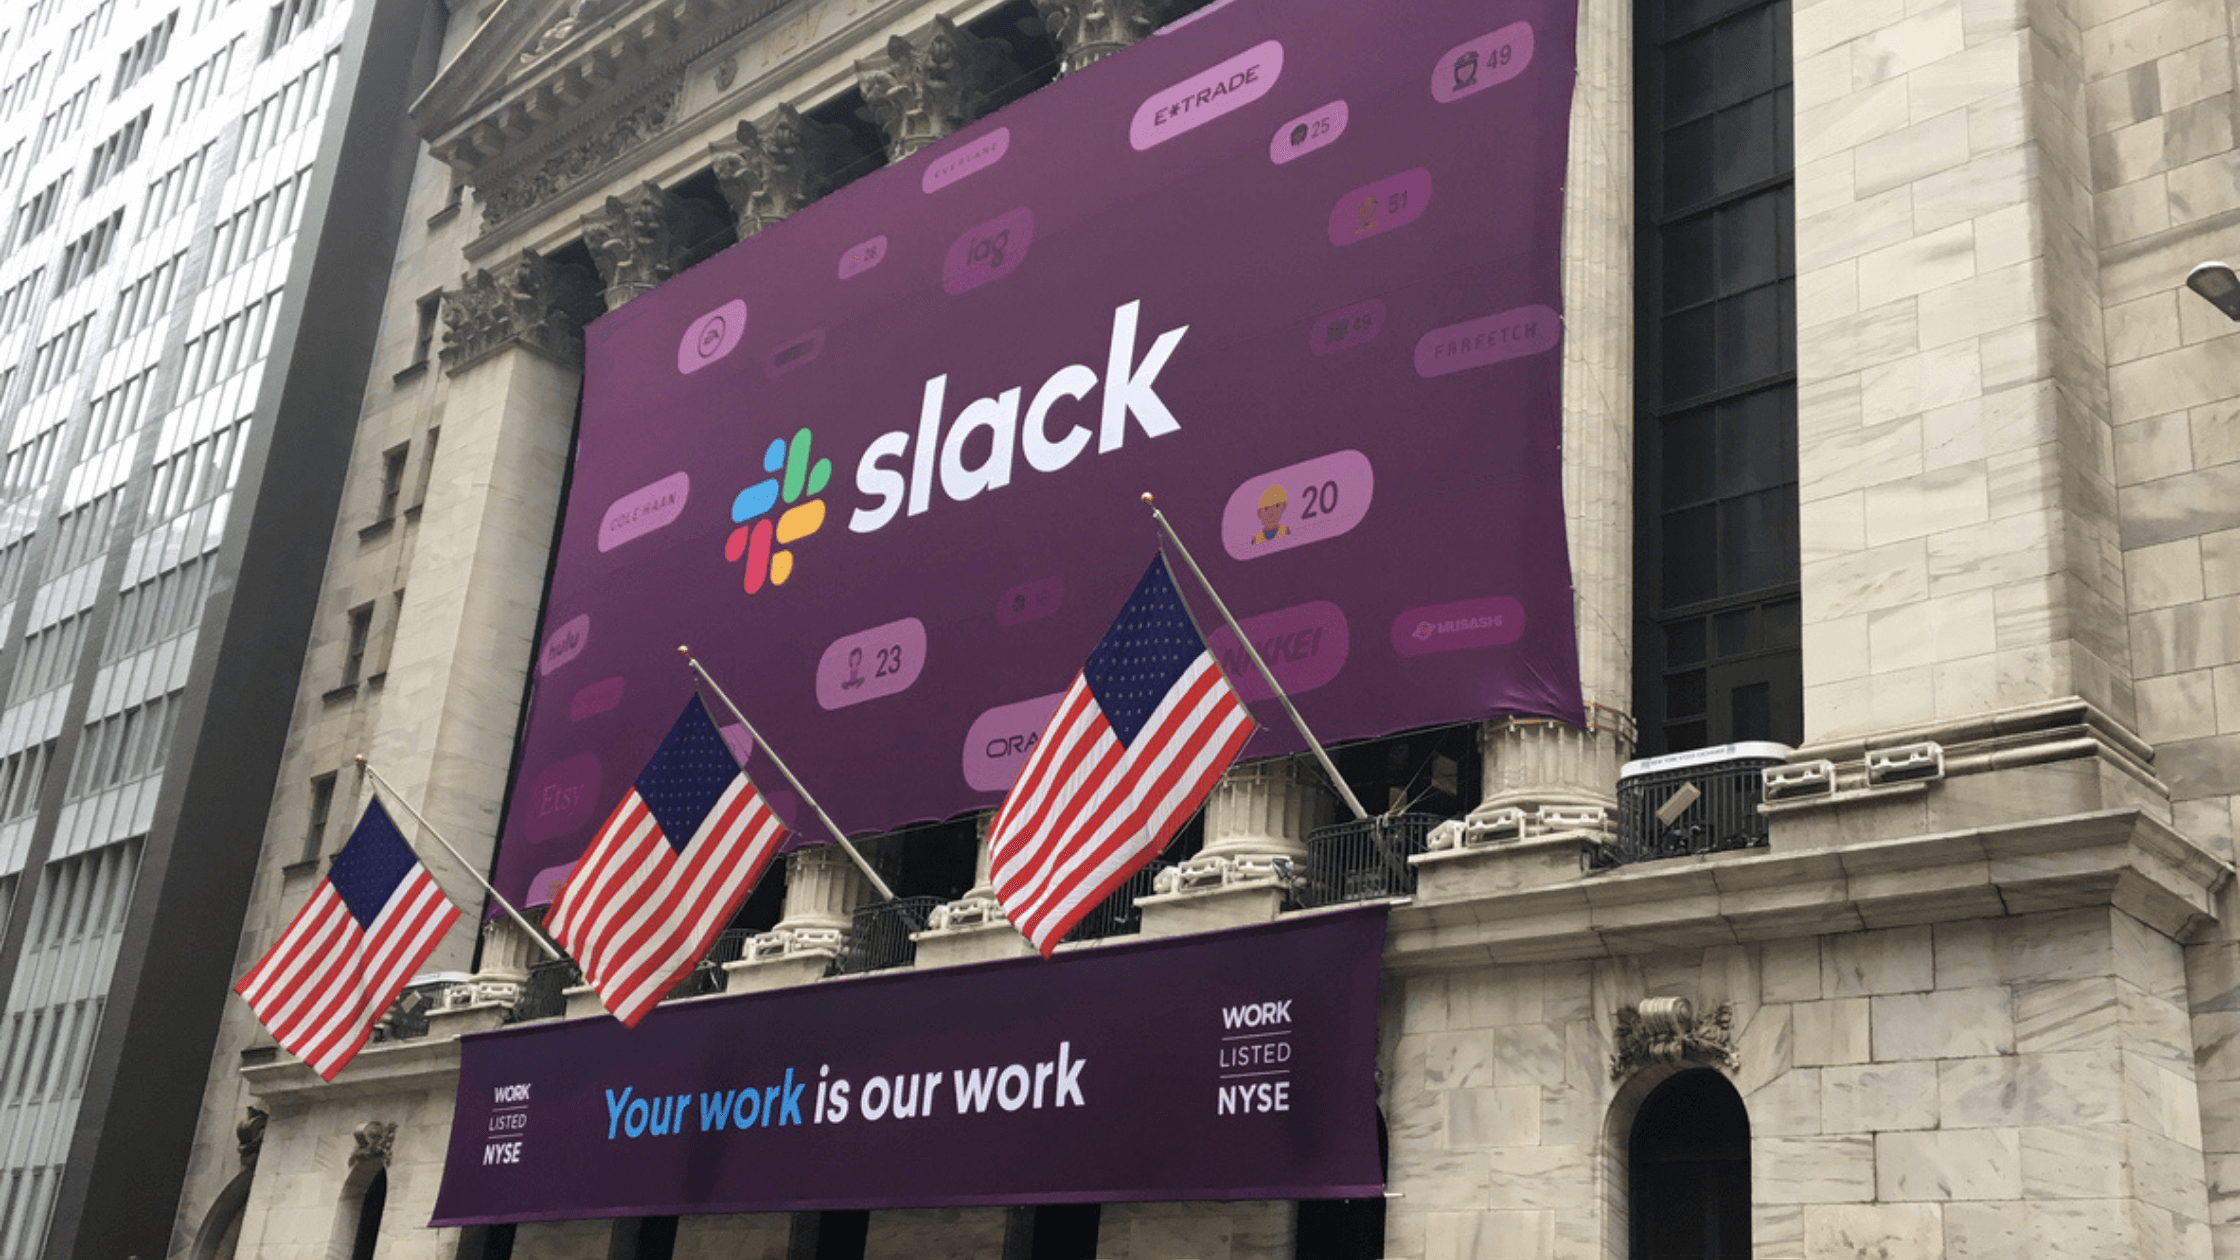 1 Software Giant That Wants to Buy Slack